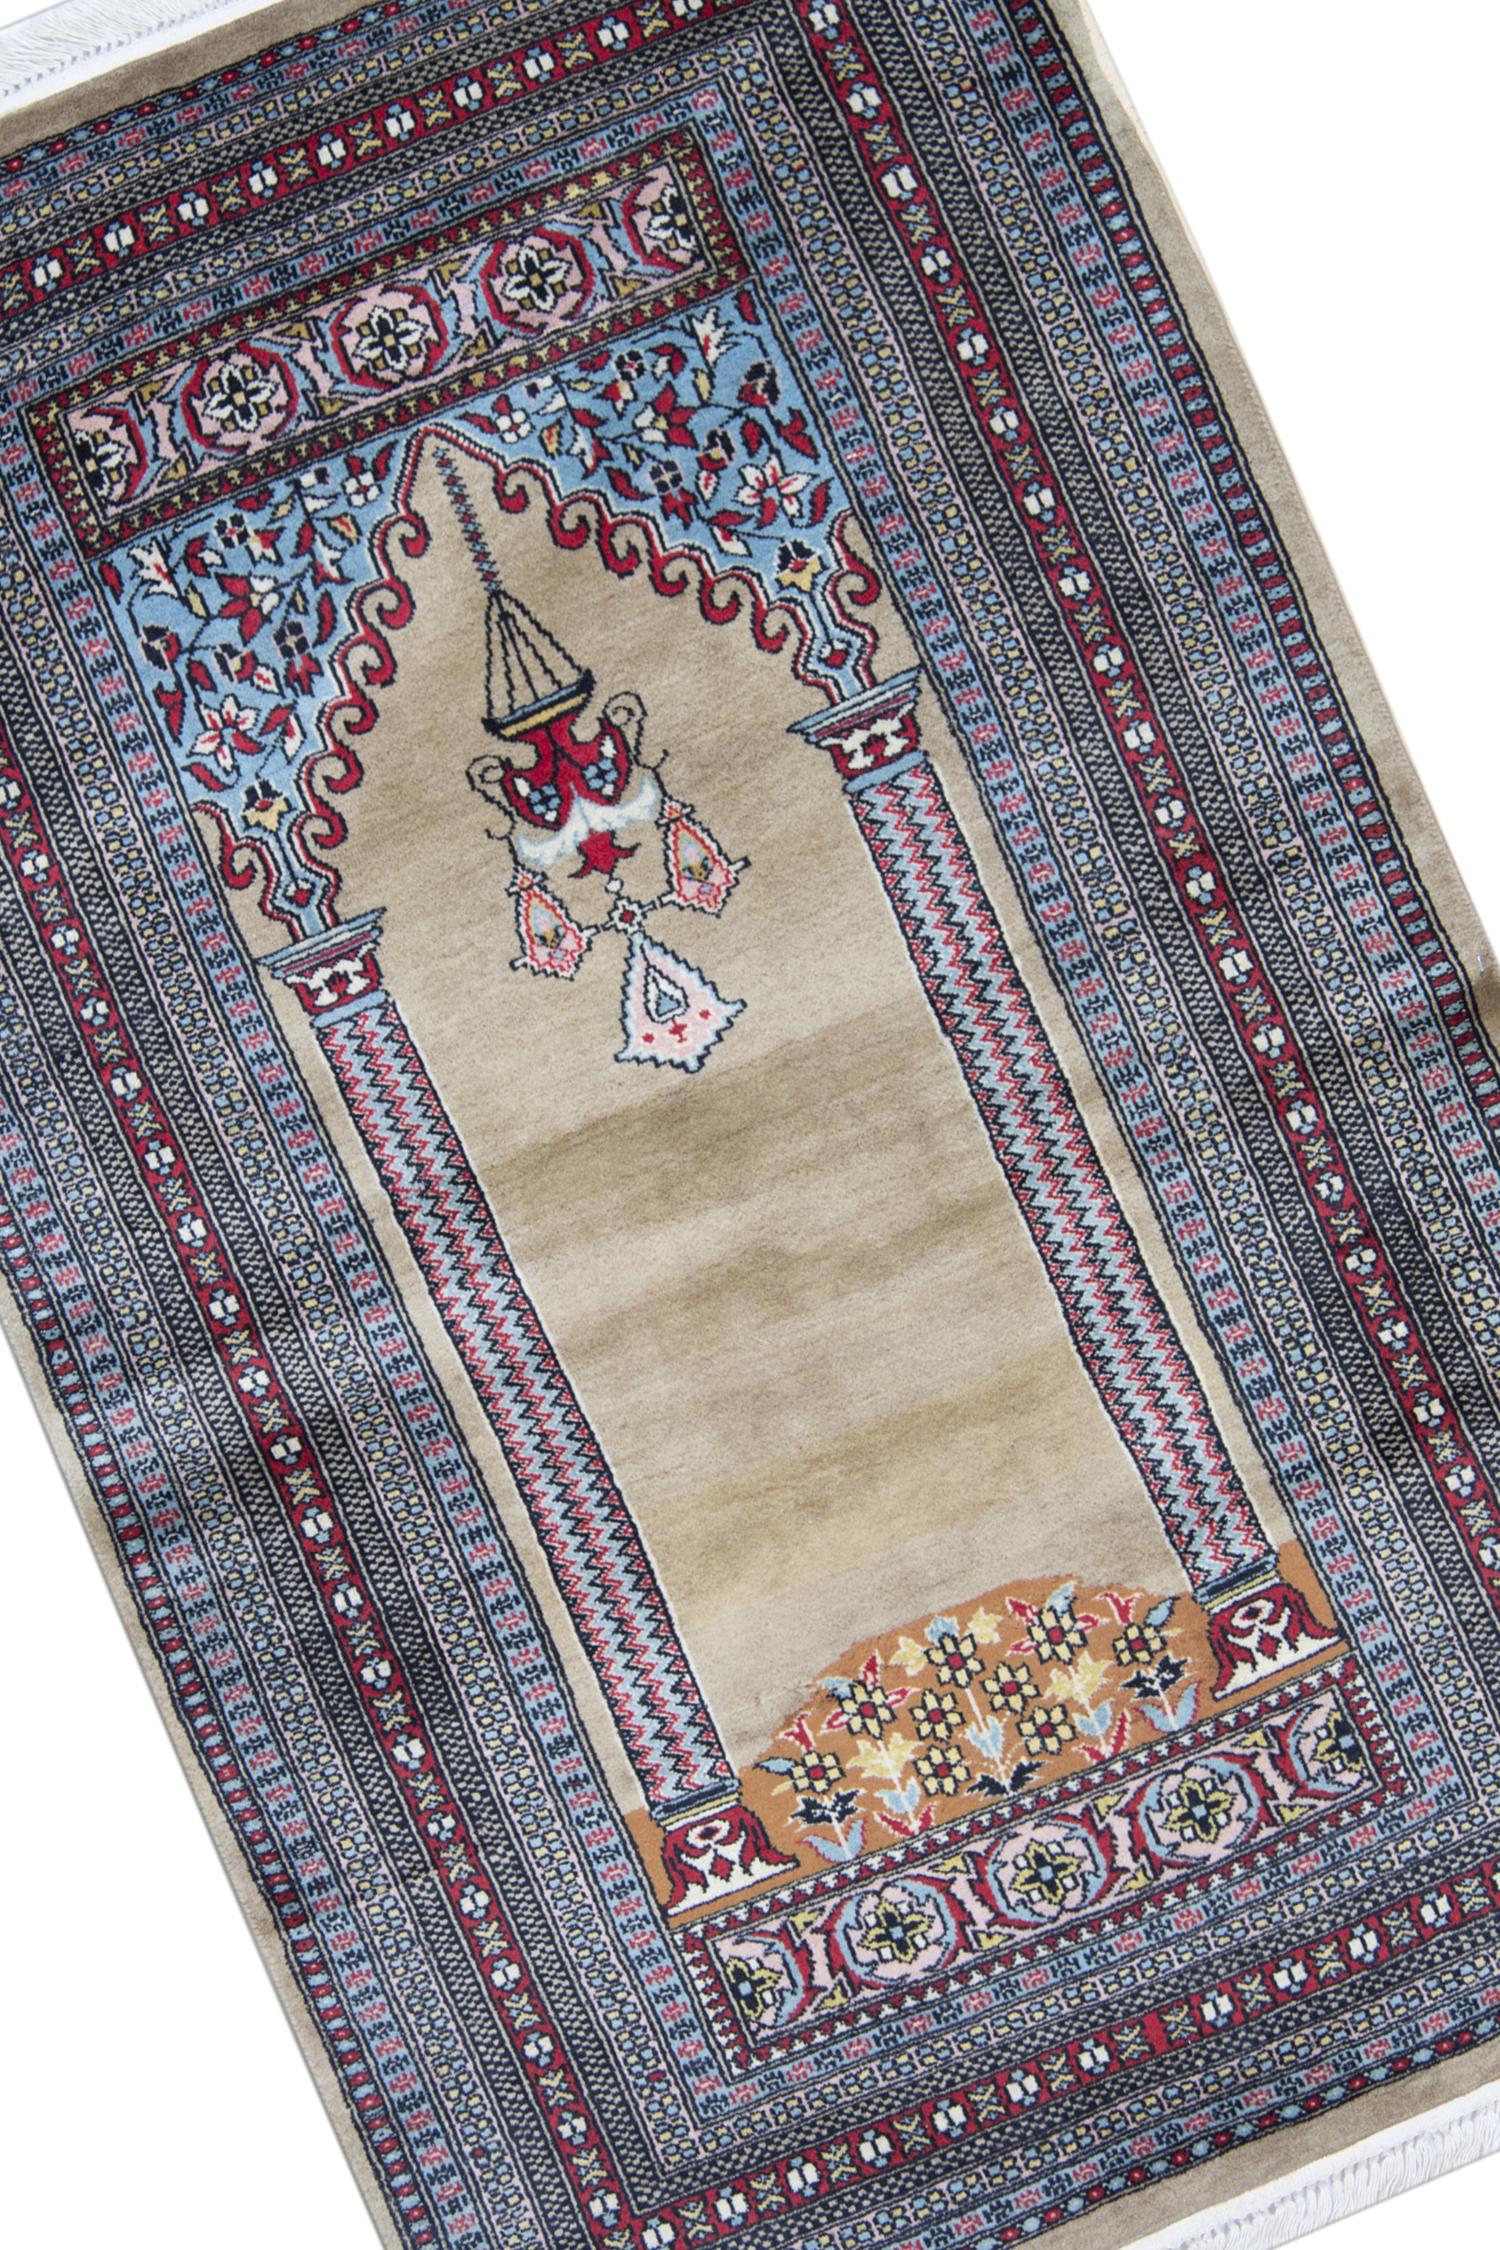 Elegantly woven with a top to bottom design, a double pillar design and chandelier design, a traditional design known to date back to 5000 BC. The delicate design and floral patterns through the border make this rug the perfect accent piece for any